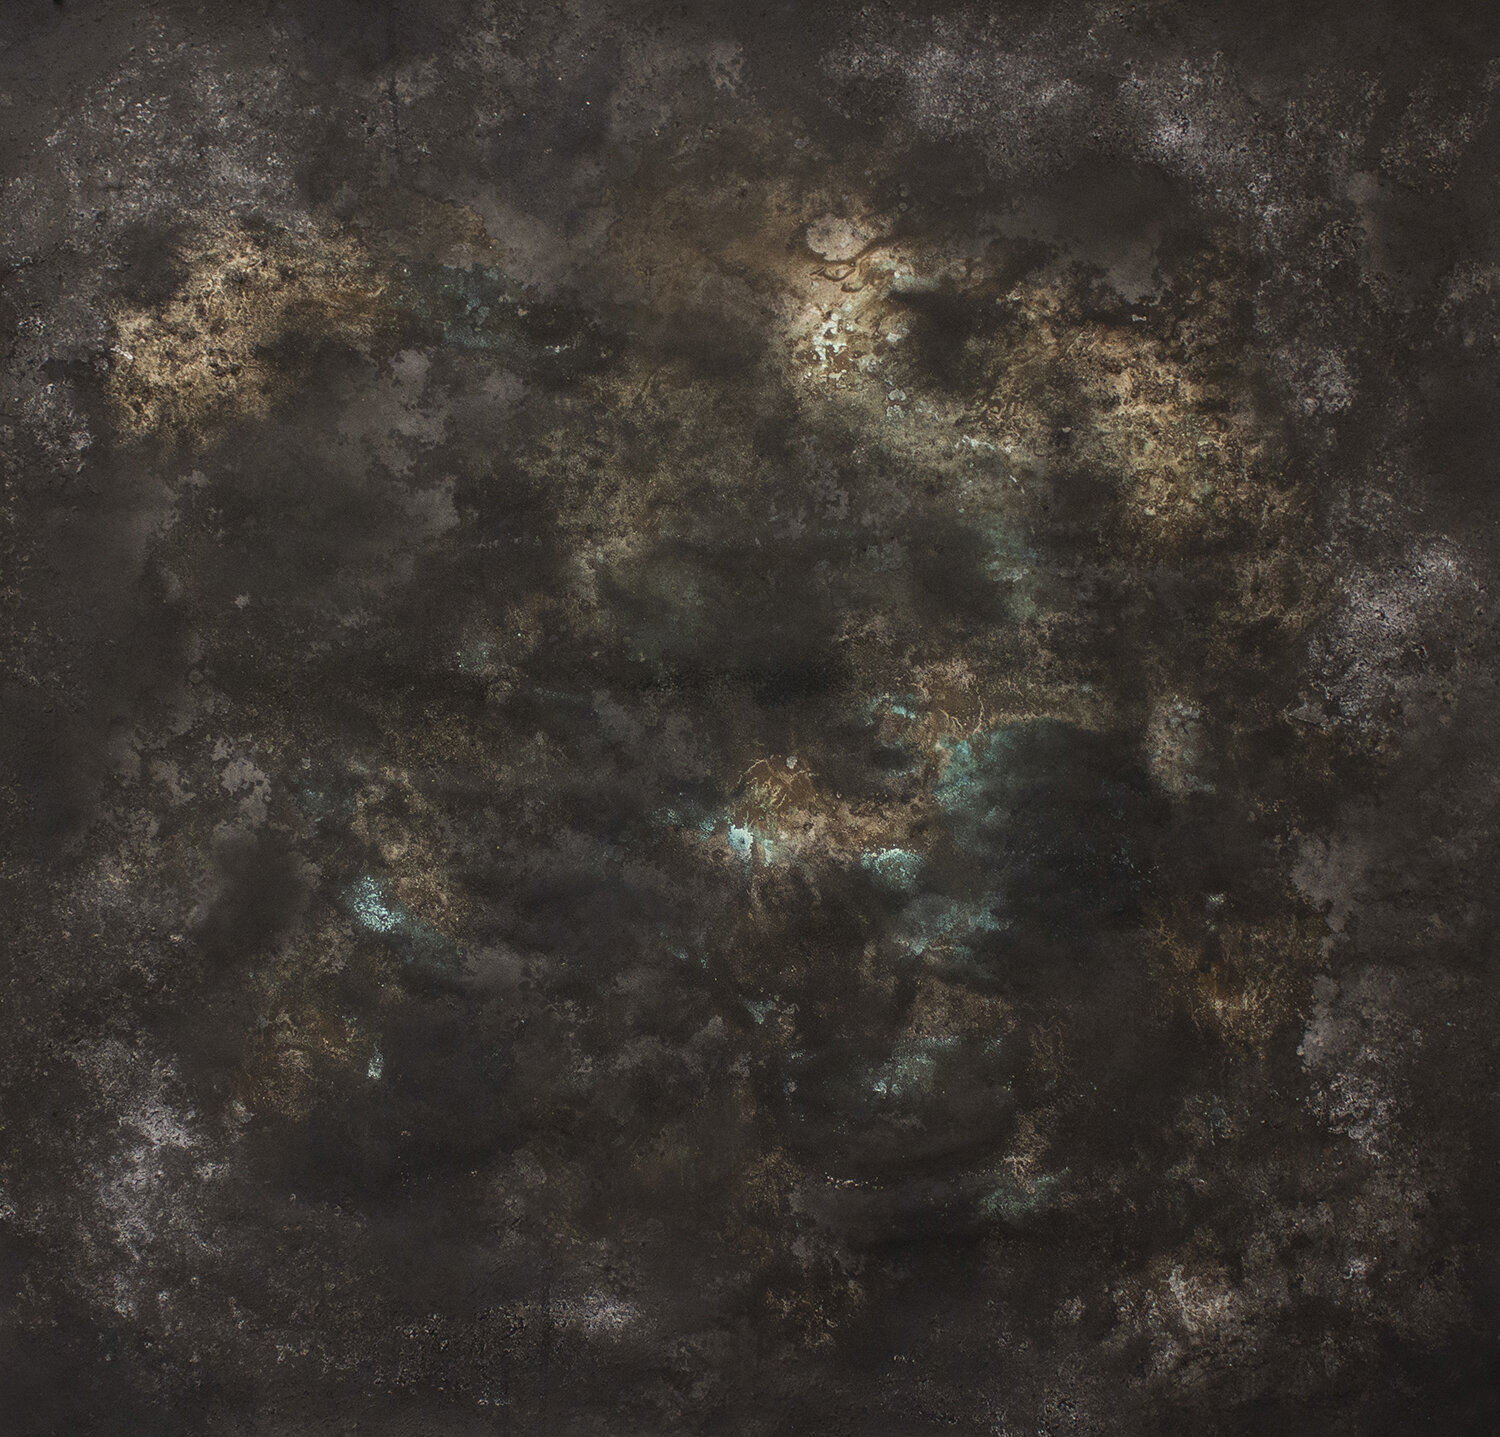    Nebula   mixed media on paper with soil and minerals from the Atacama Desert, 38 x 38 inches 